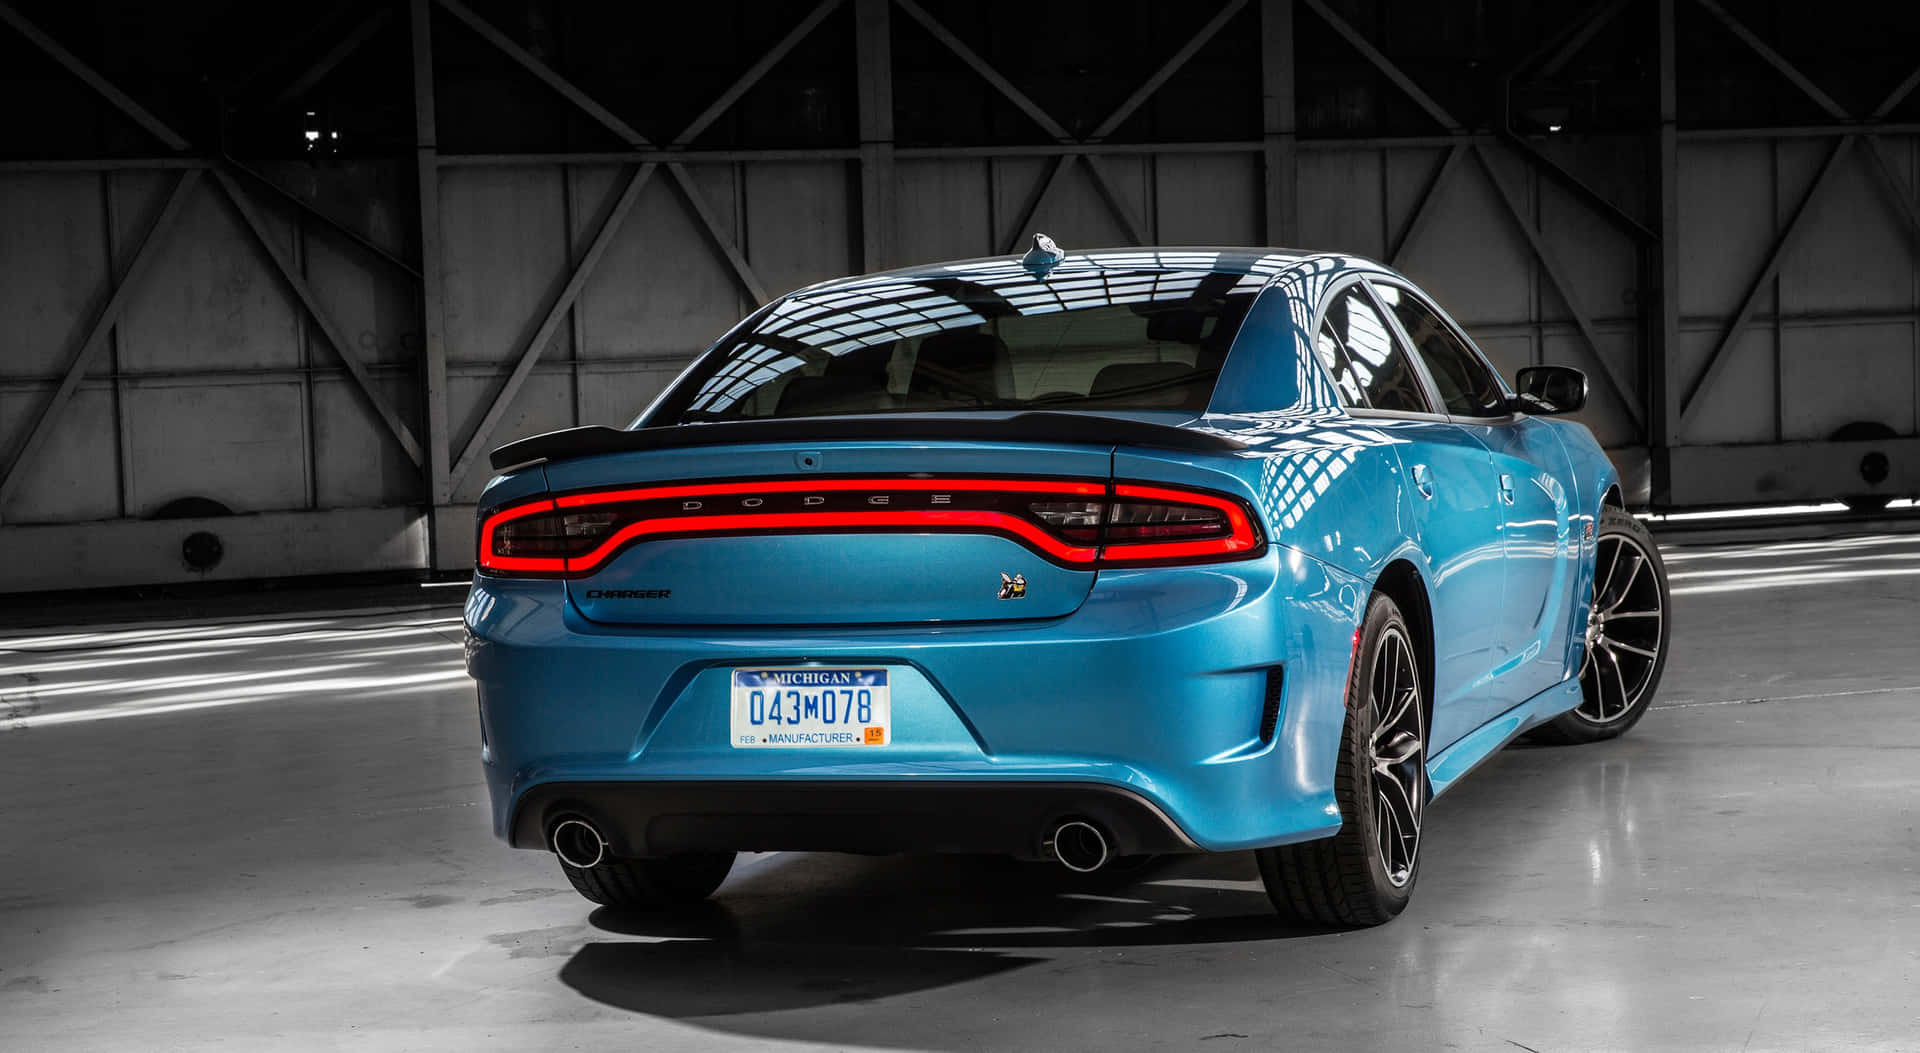 The Rear End Of A Blue Dodge Charger Wallpaper